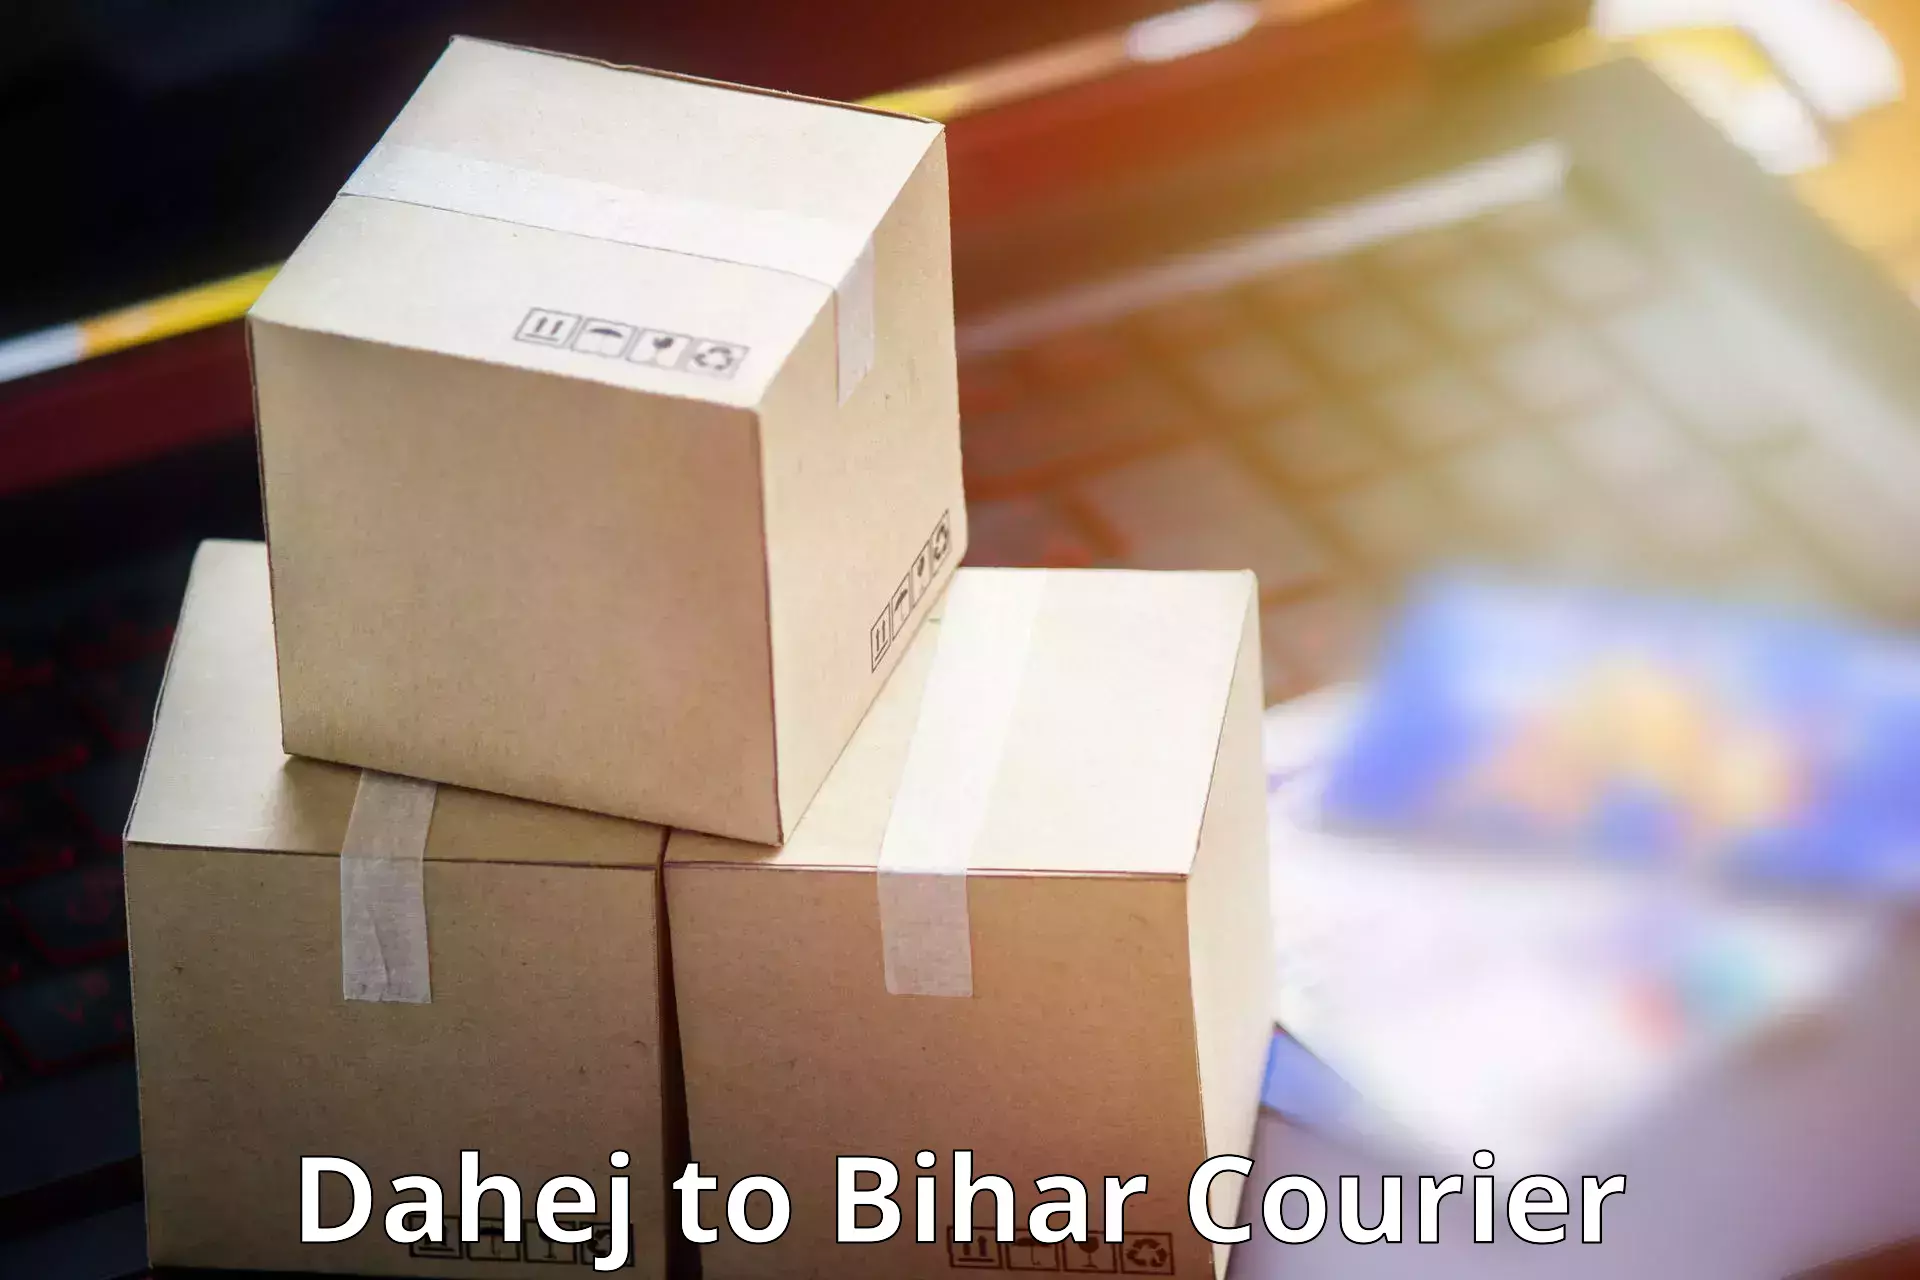 Business delivery service Dahej to Andar Siwan